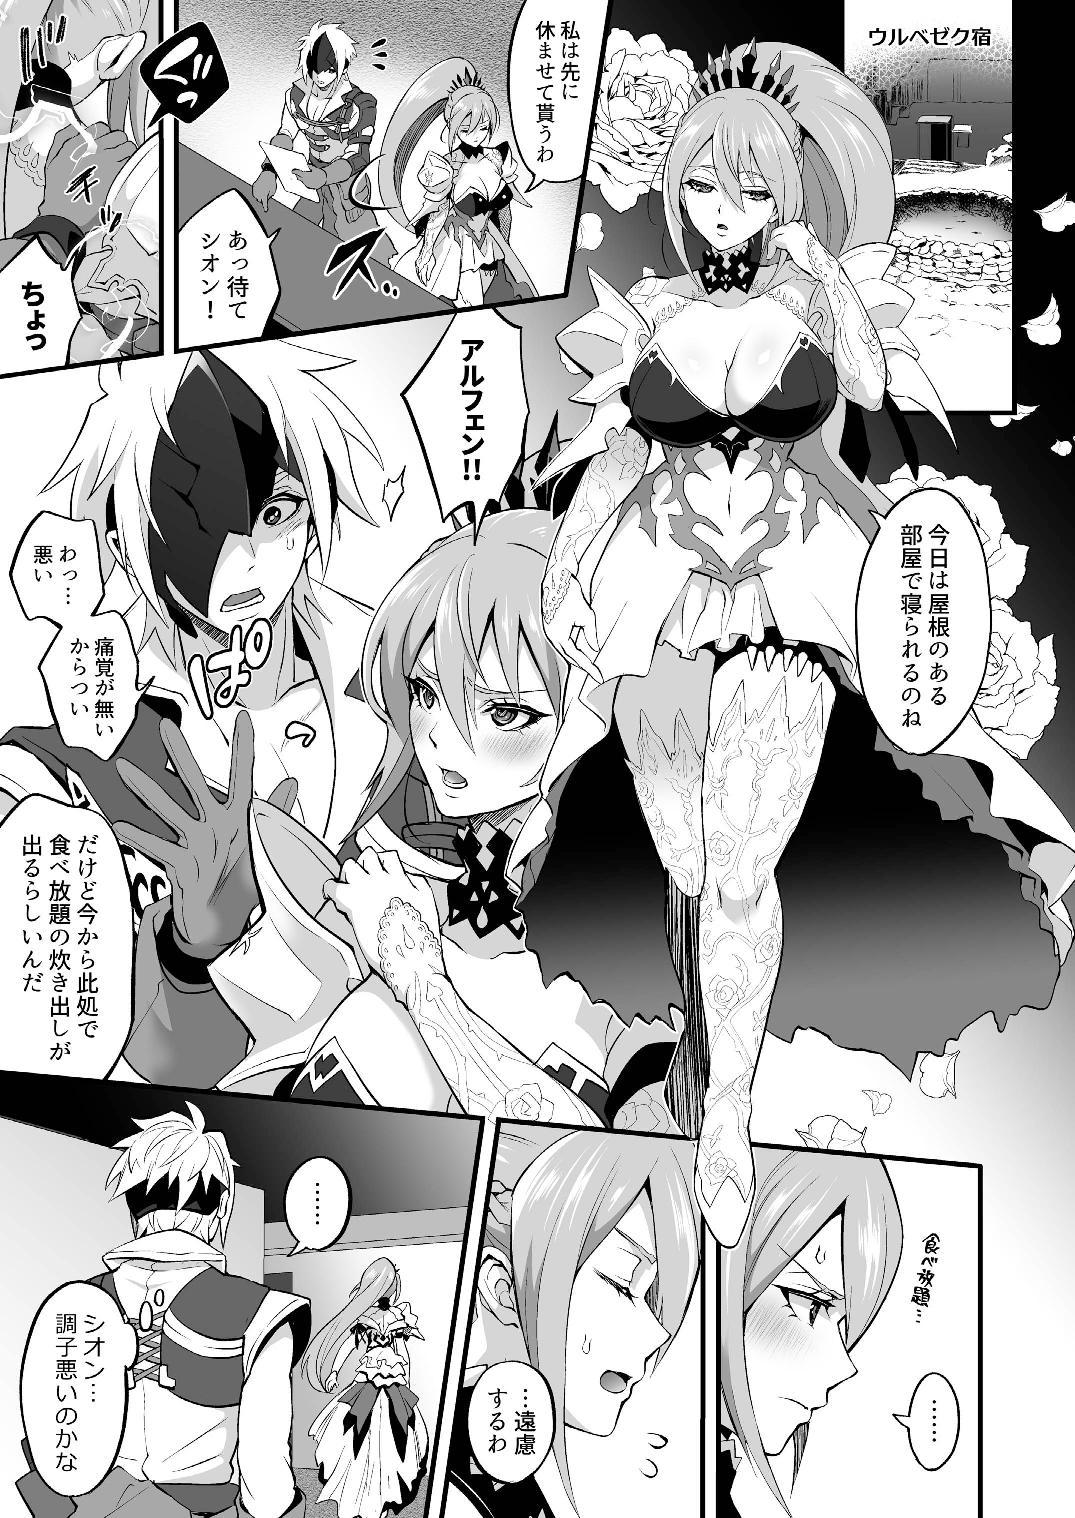 Stepson 私に詰め寄ると〇〇〇がイくわよ…! - Tales of arise Bdsm - Page 3